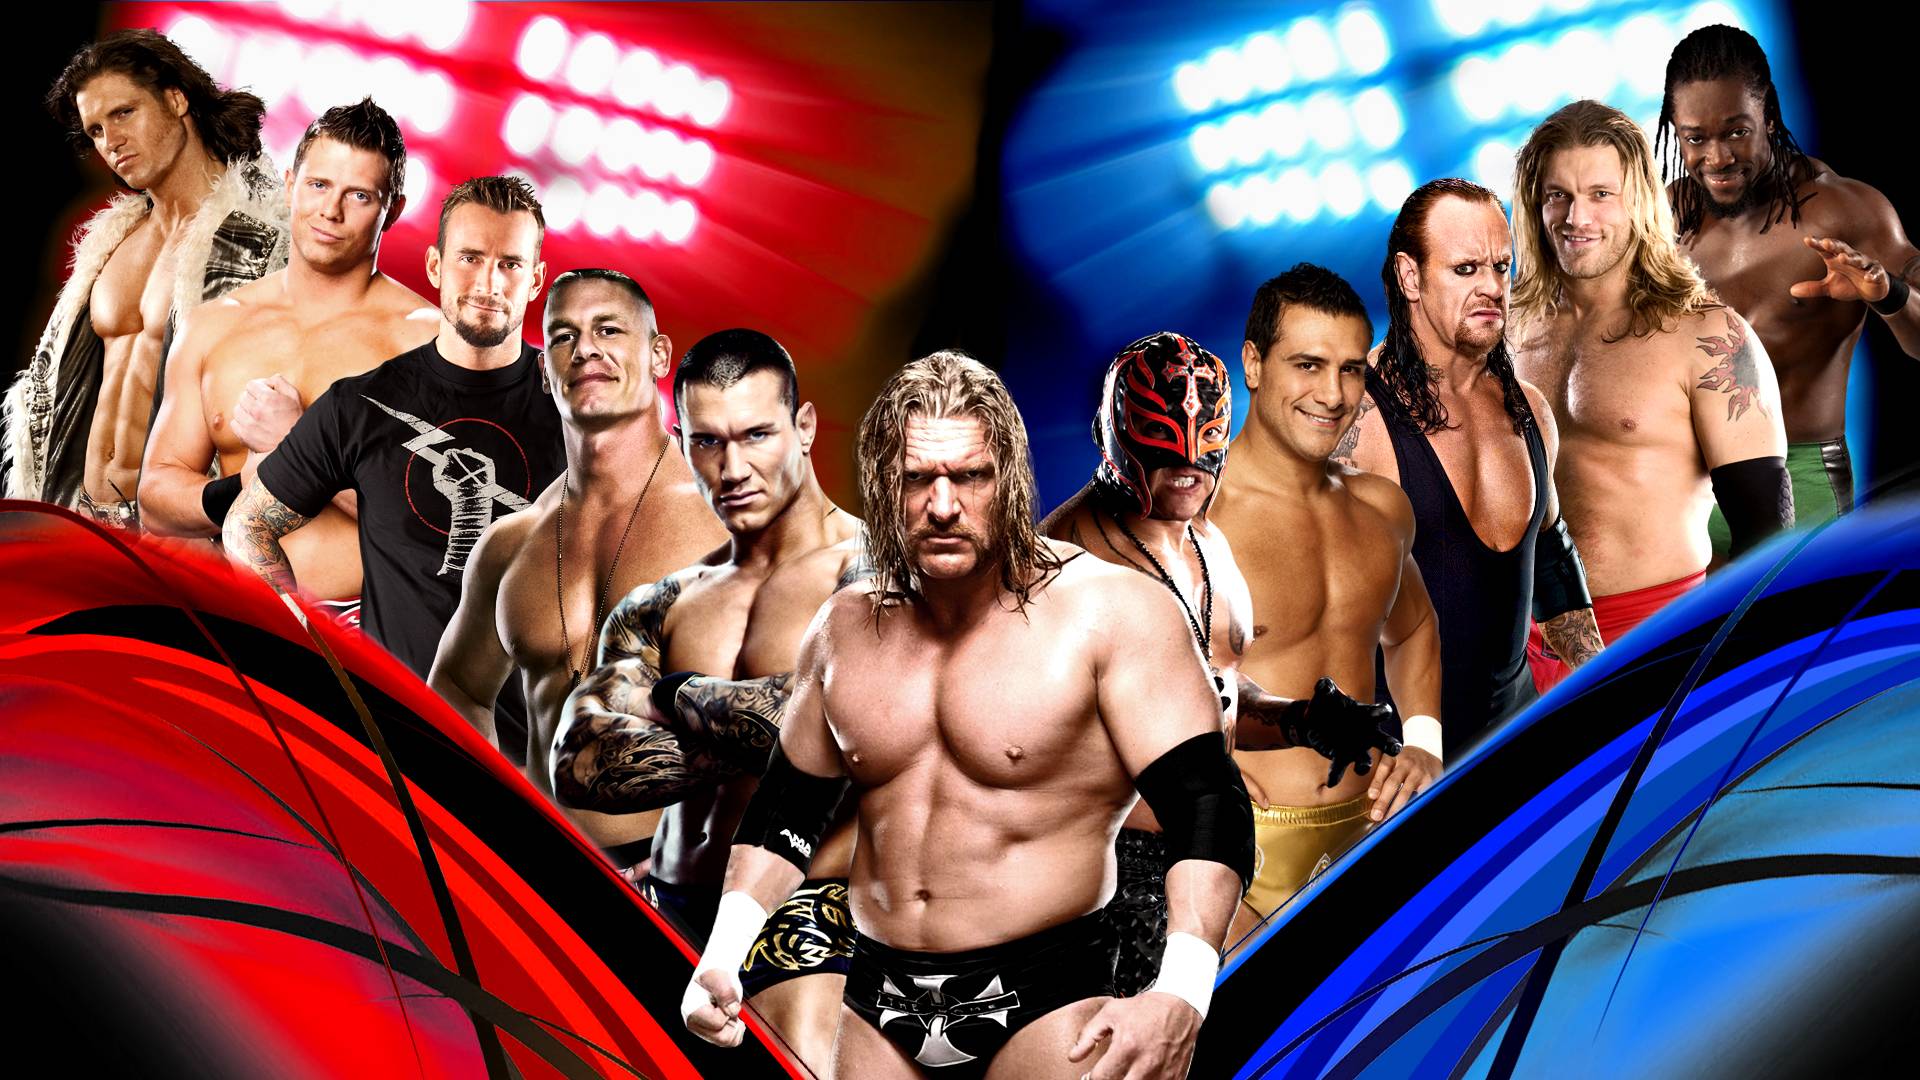 New Cover and Wallpaper I made!! vs Raw 2011.ws